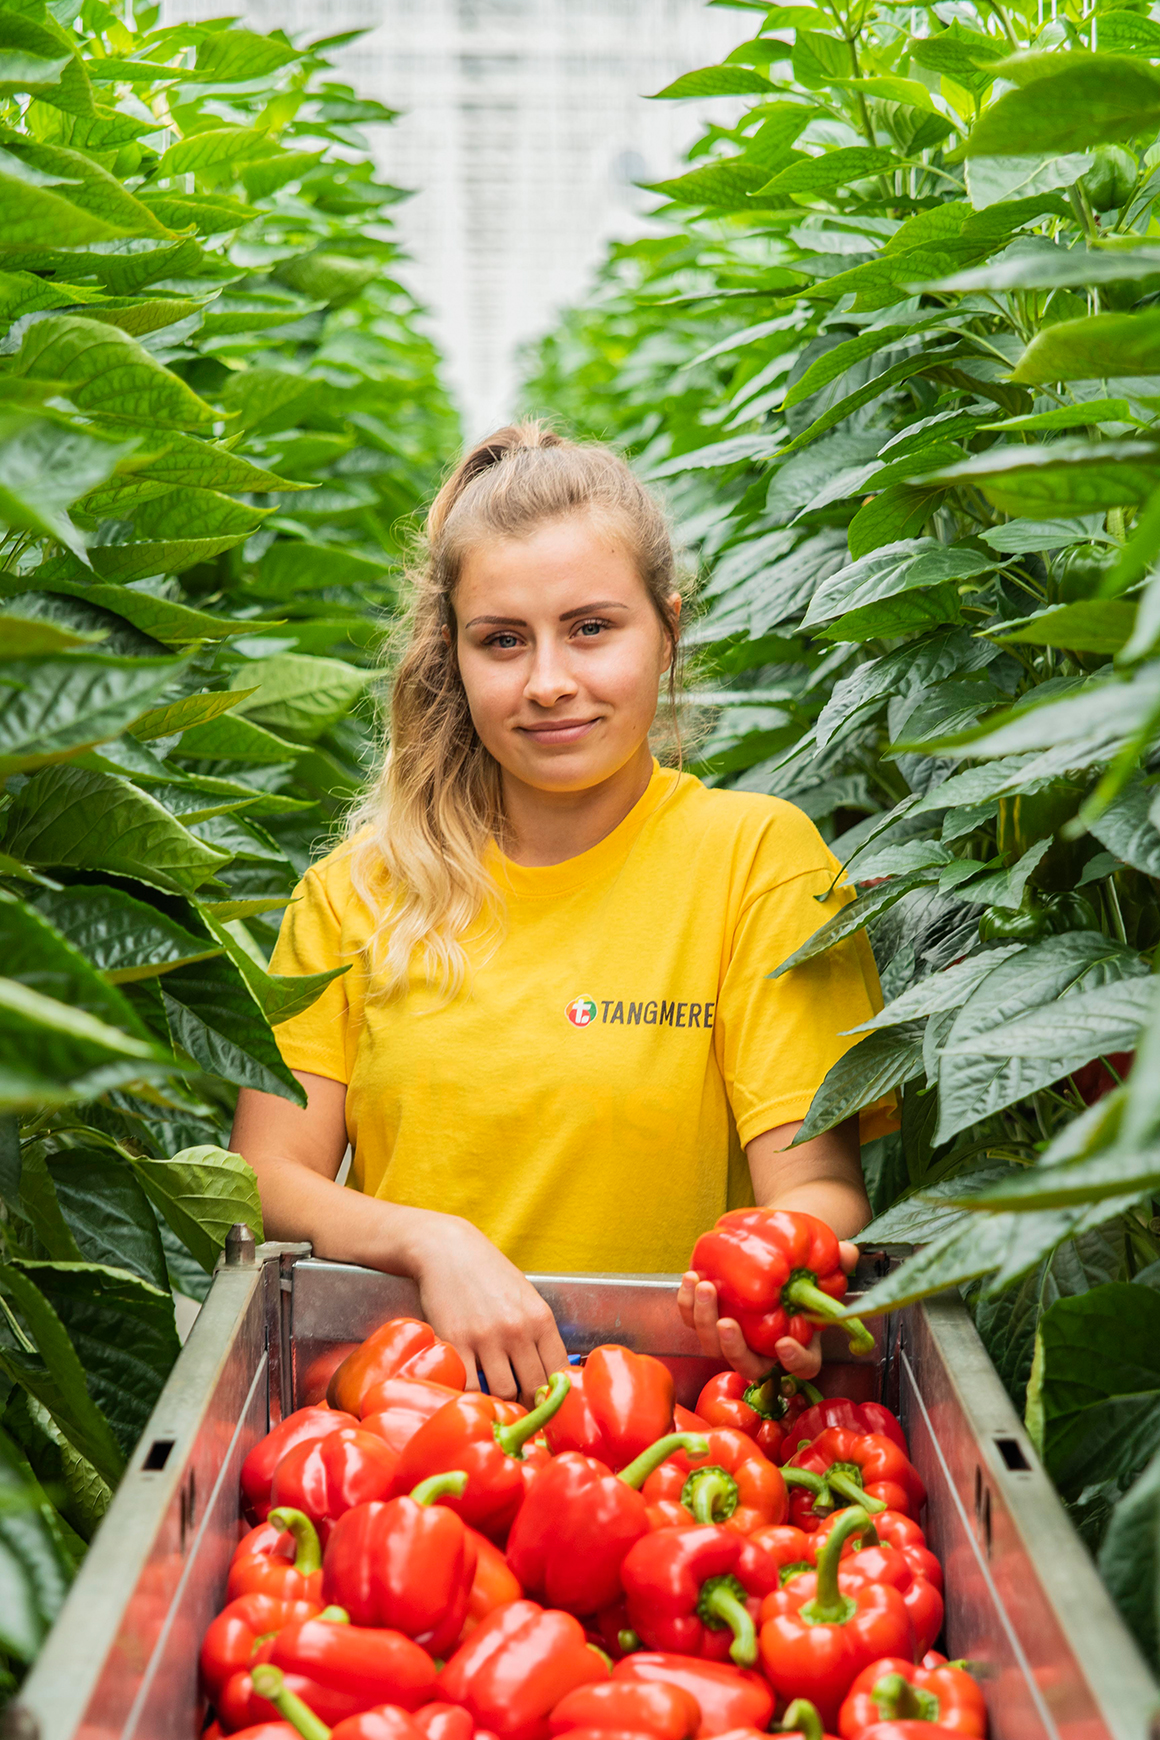 A female employee wearing a yellow tshirt with a full picking bin or red bell peppers.